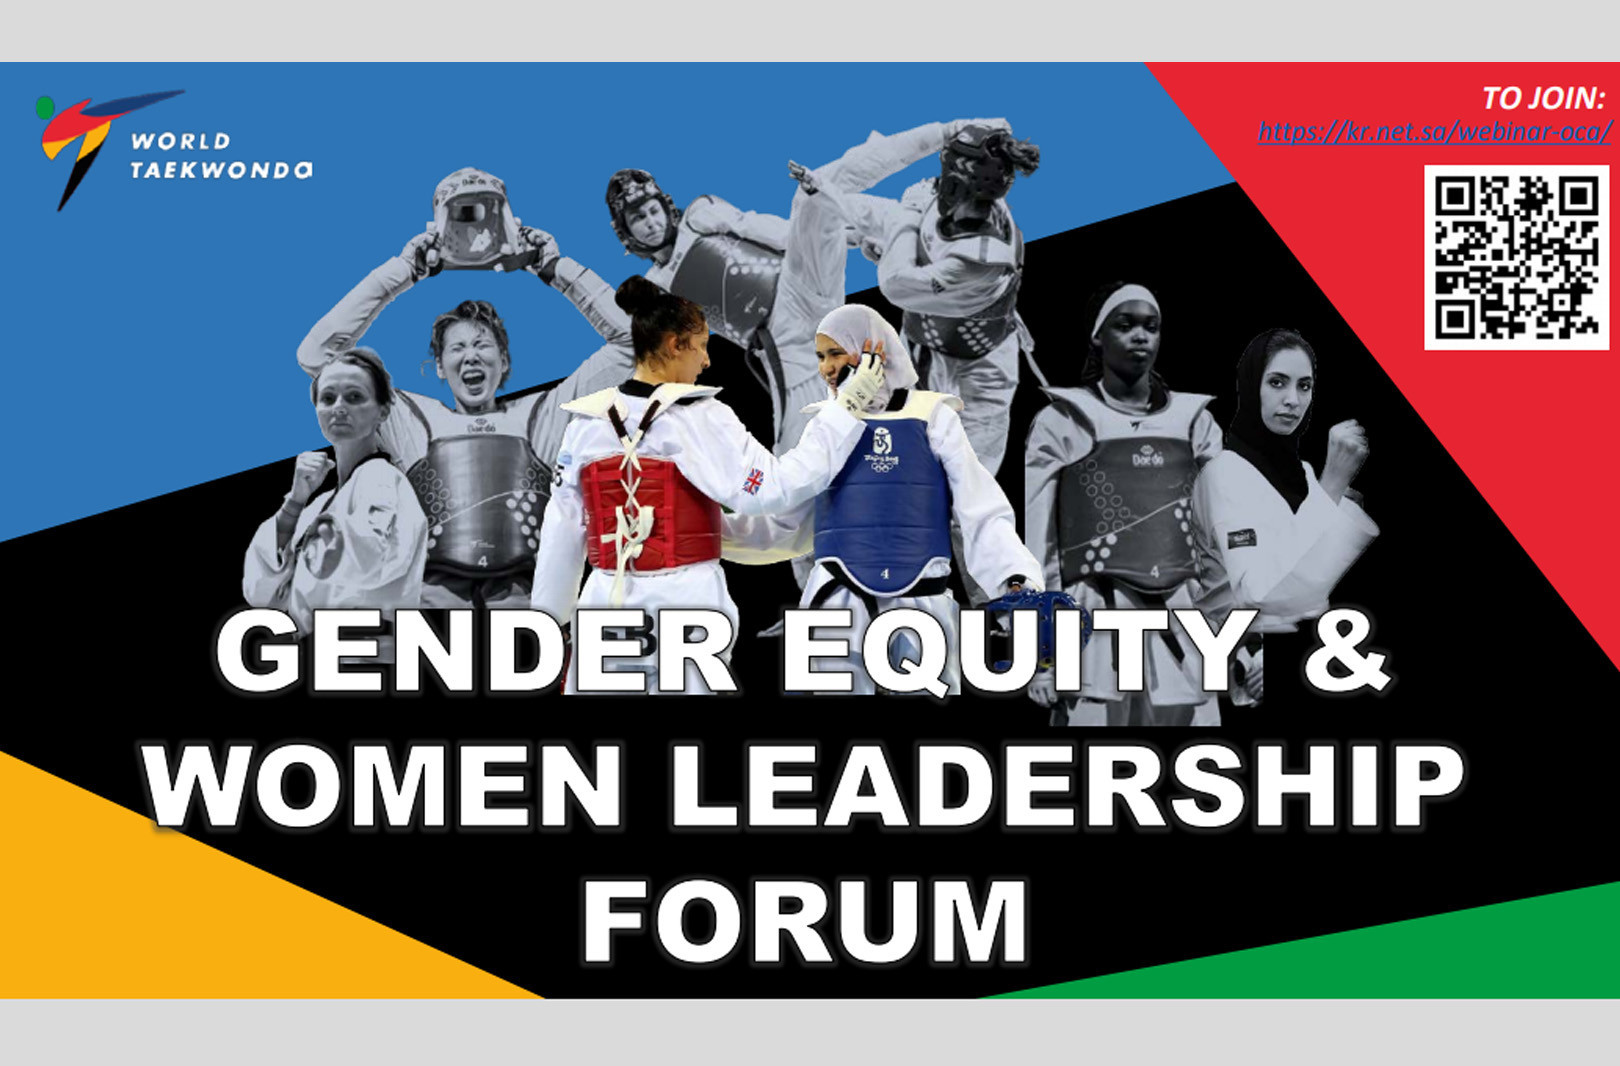 Bach set to give speech at World Taekwondo Gender Equity and Leadership Forum